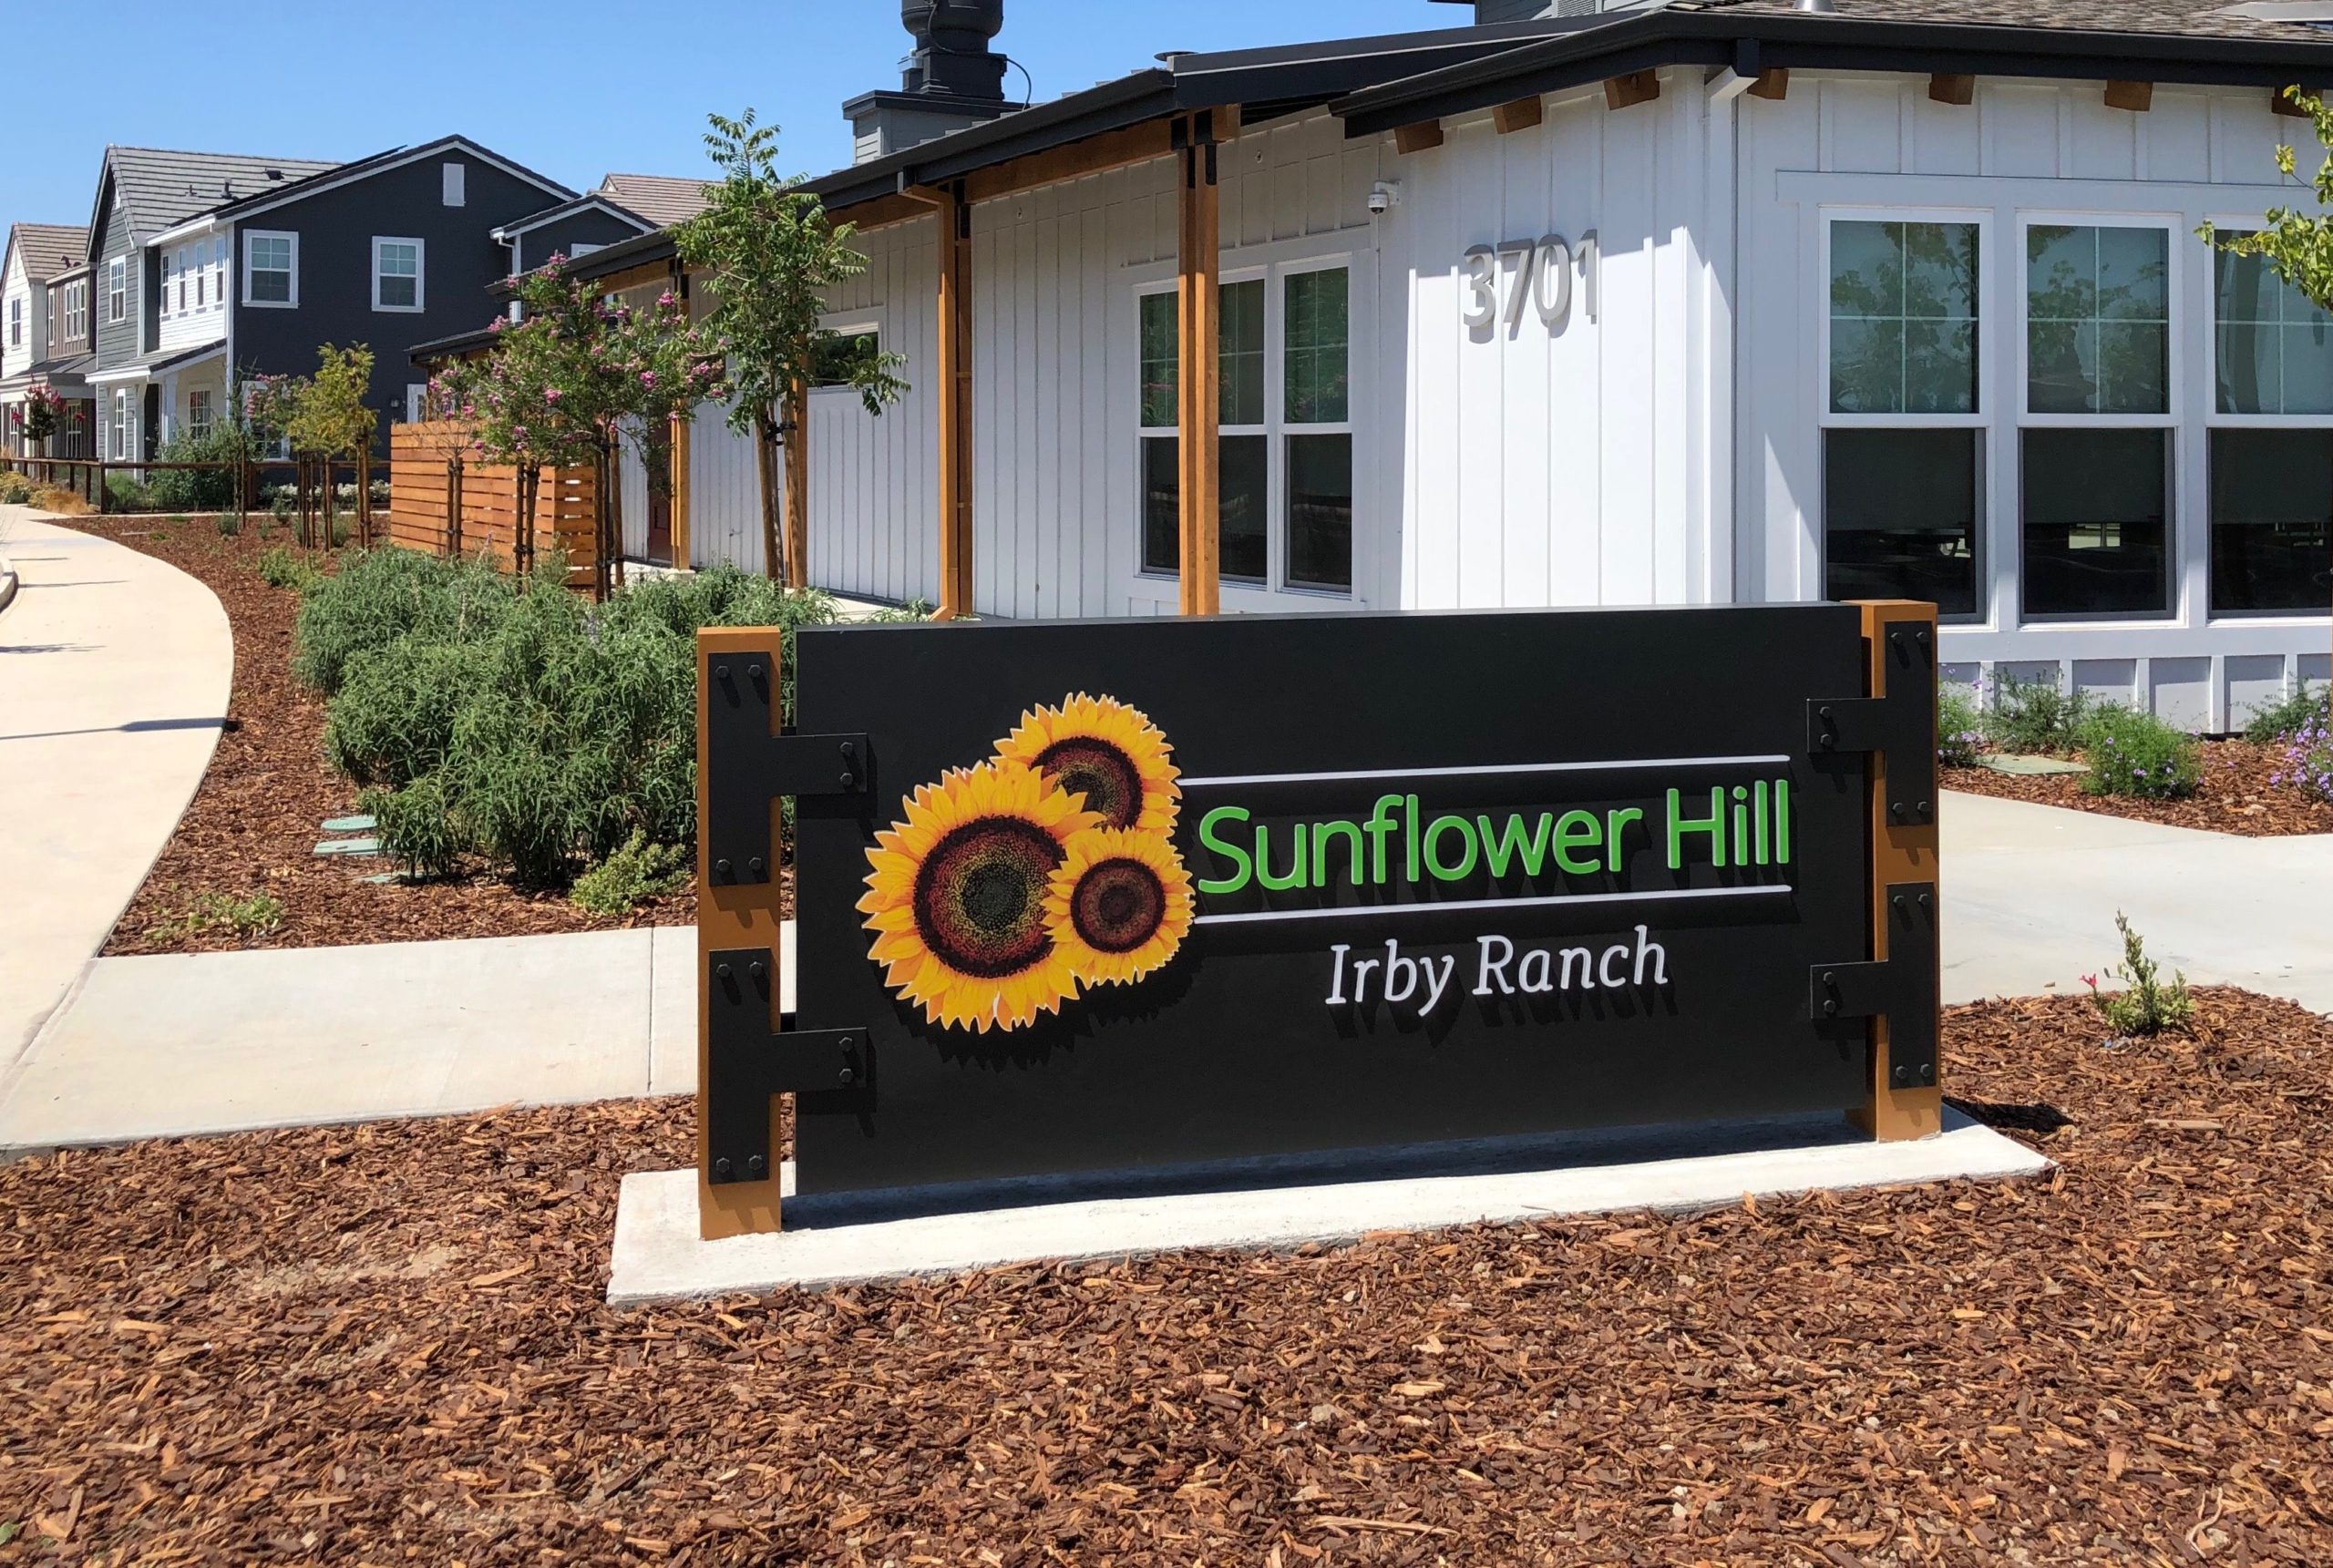 Sunflower Hill at Irby Ranch